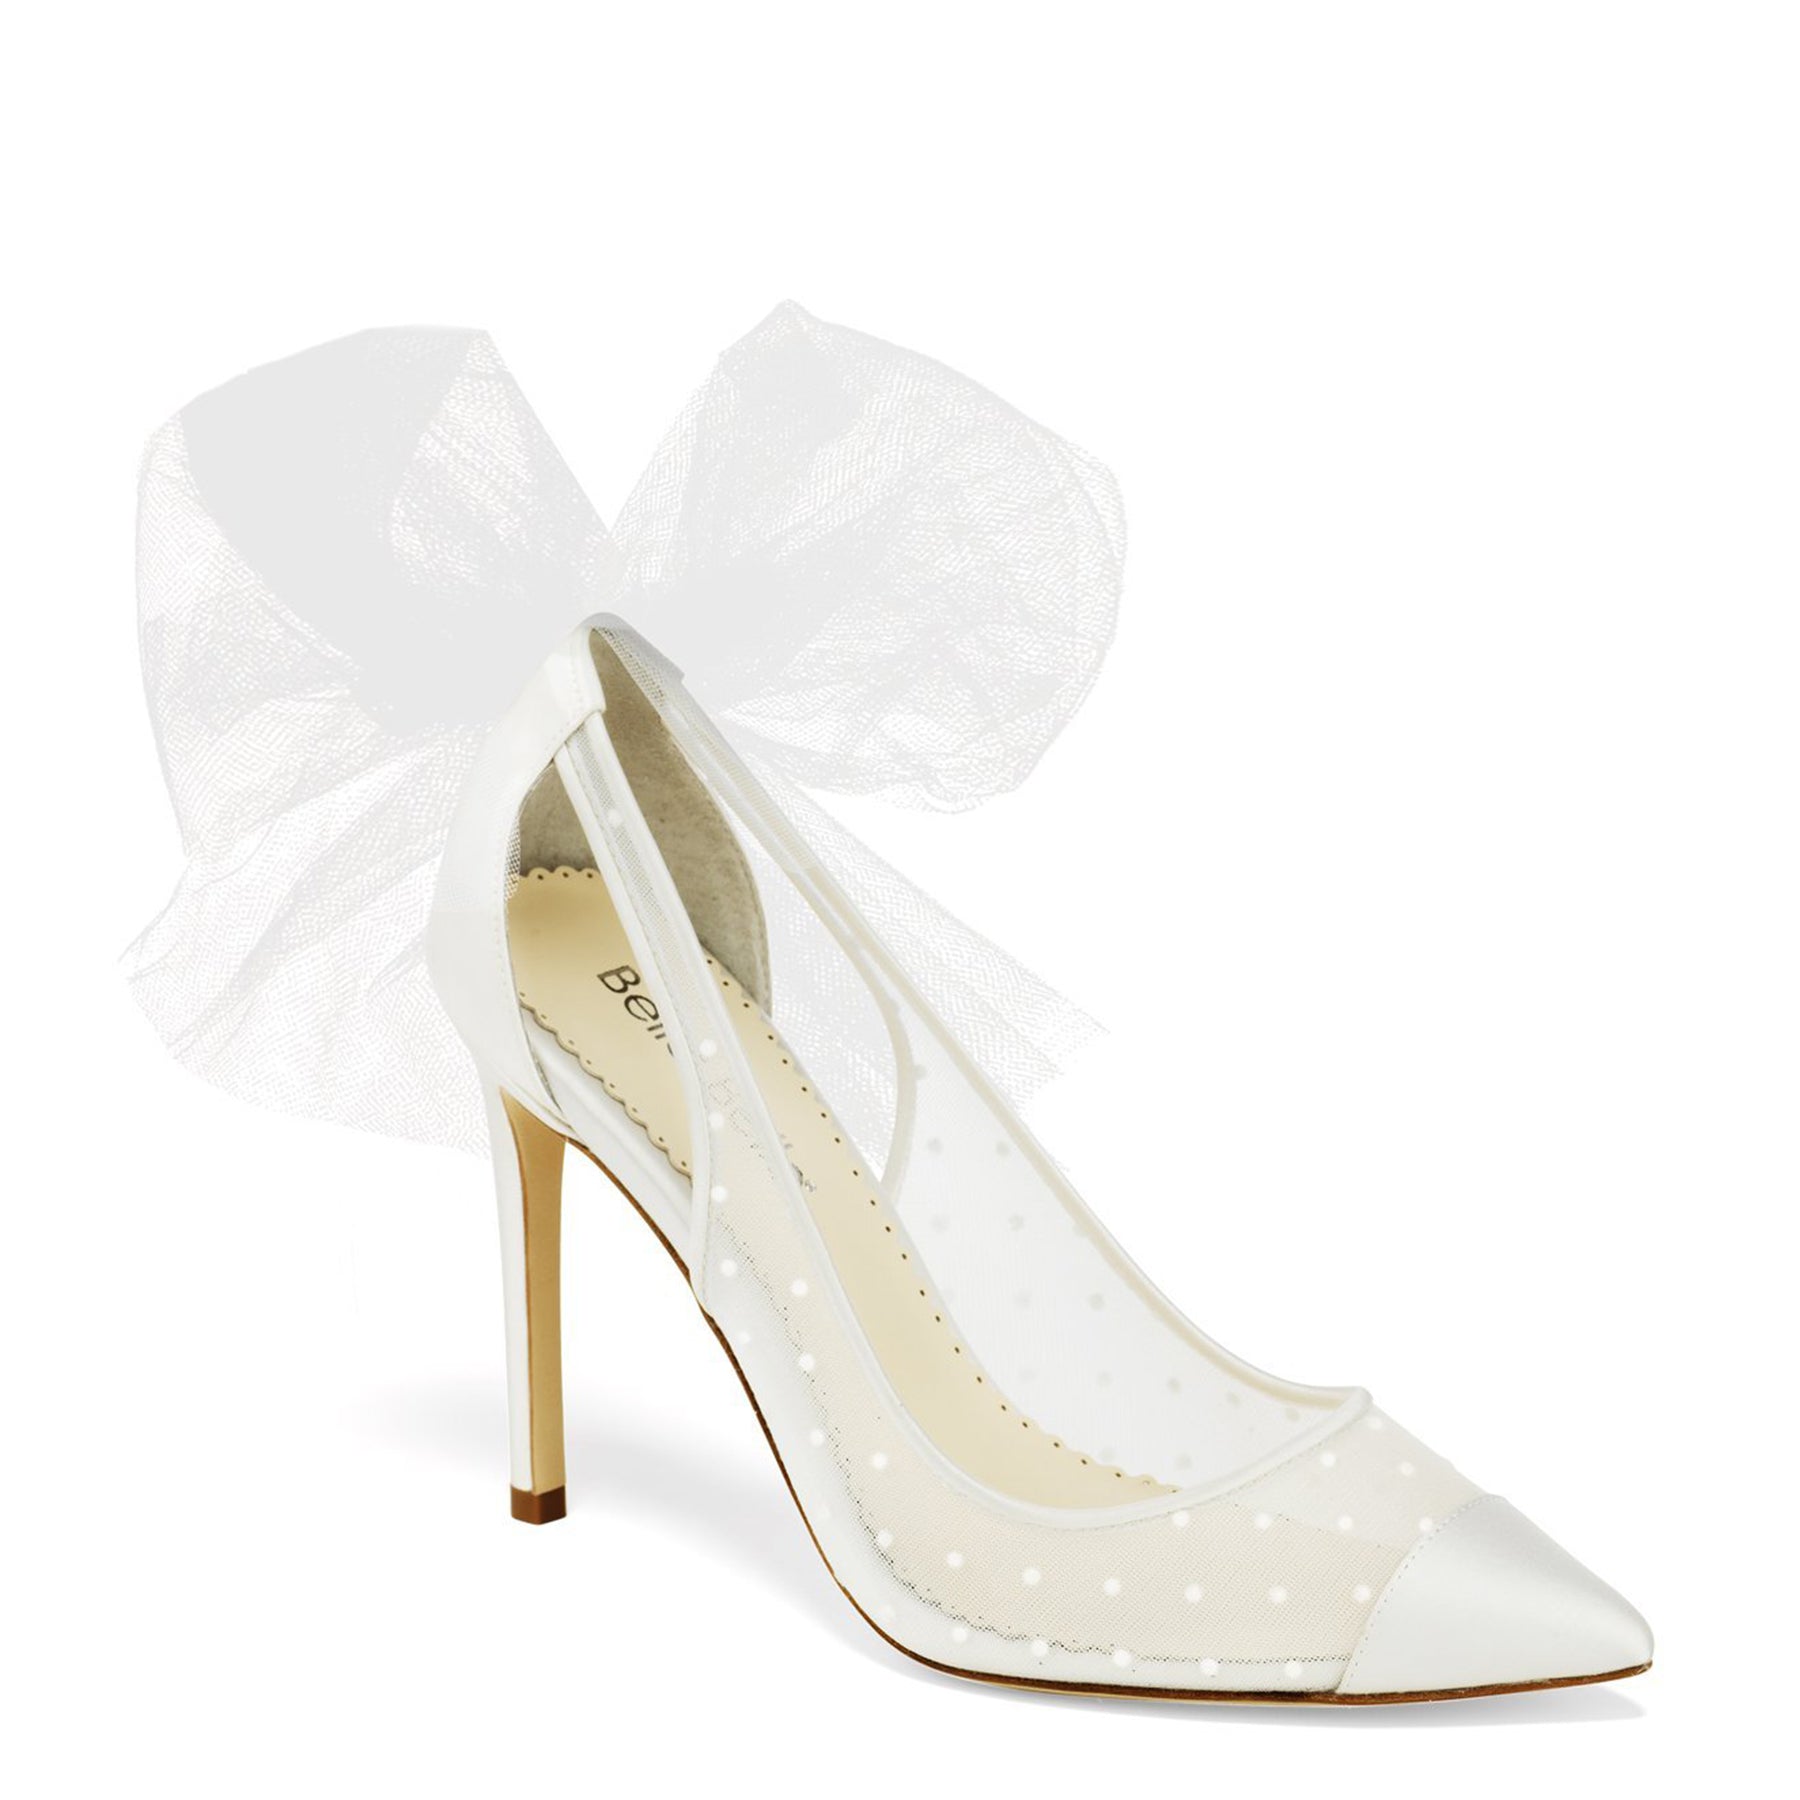 Matilda - Polka Dot Ivory Pump With Tulle Bow